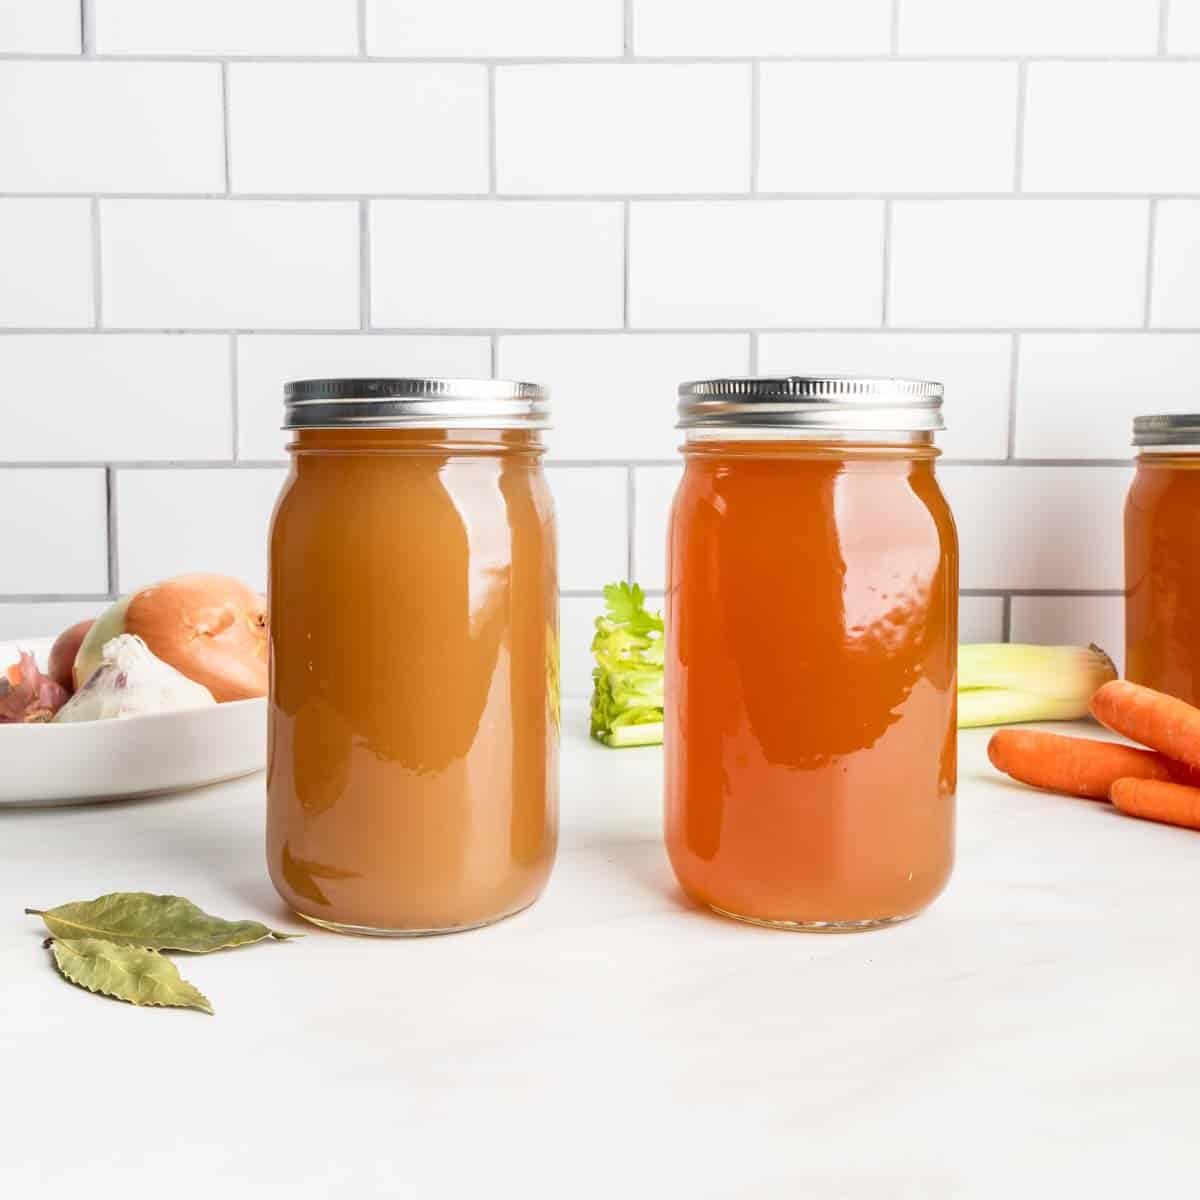 Comparing two jars of chicken feet bone broth made differently. 